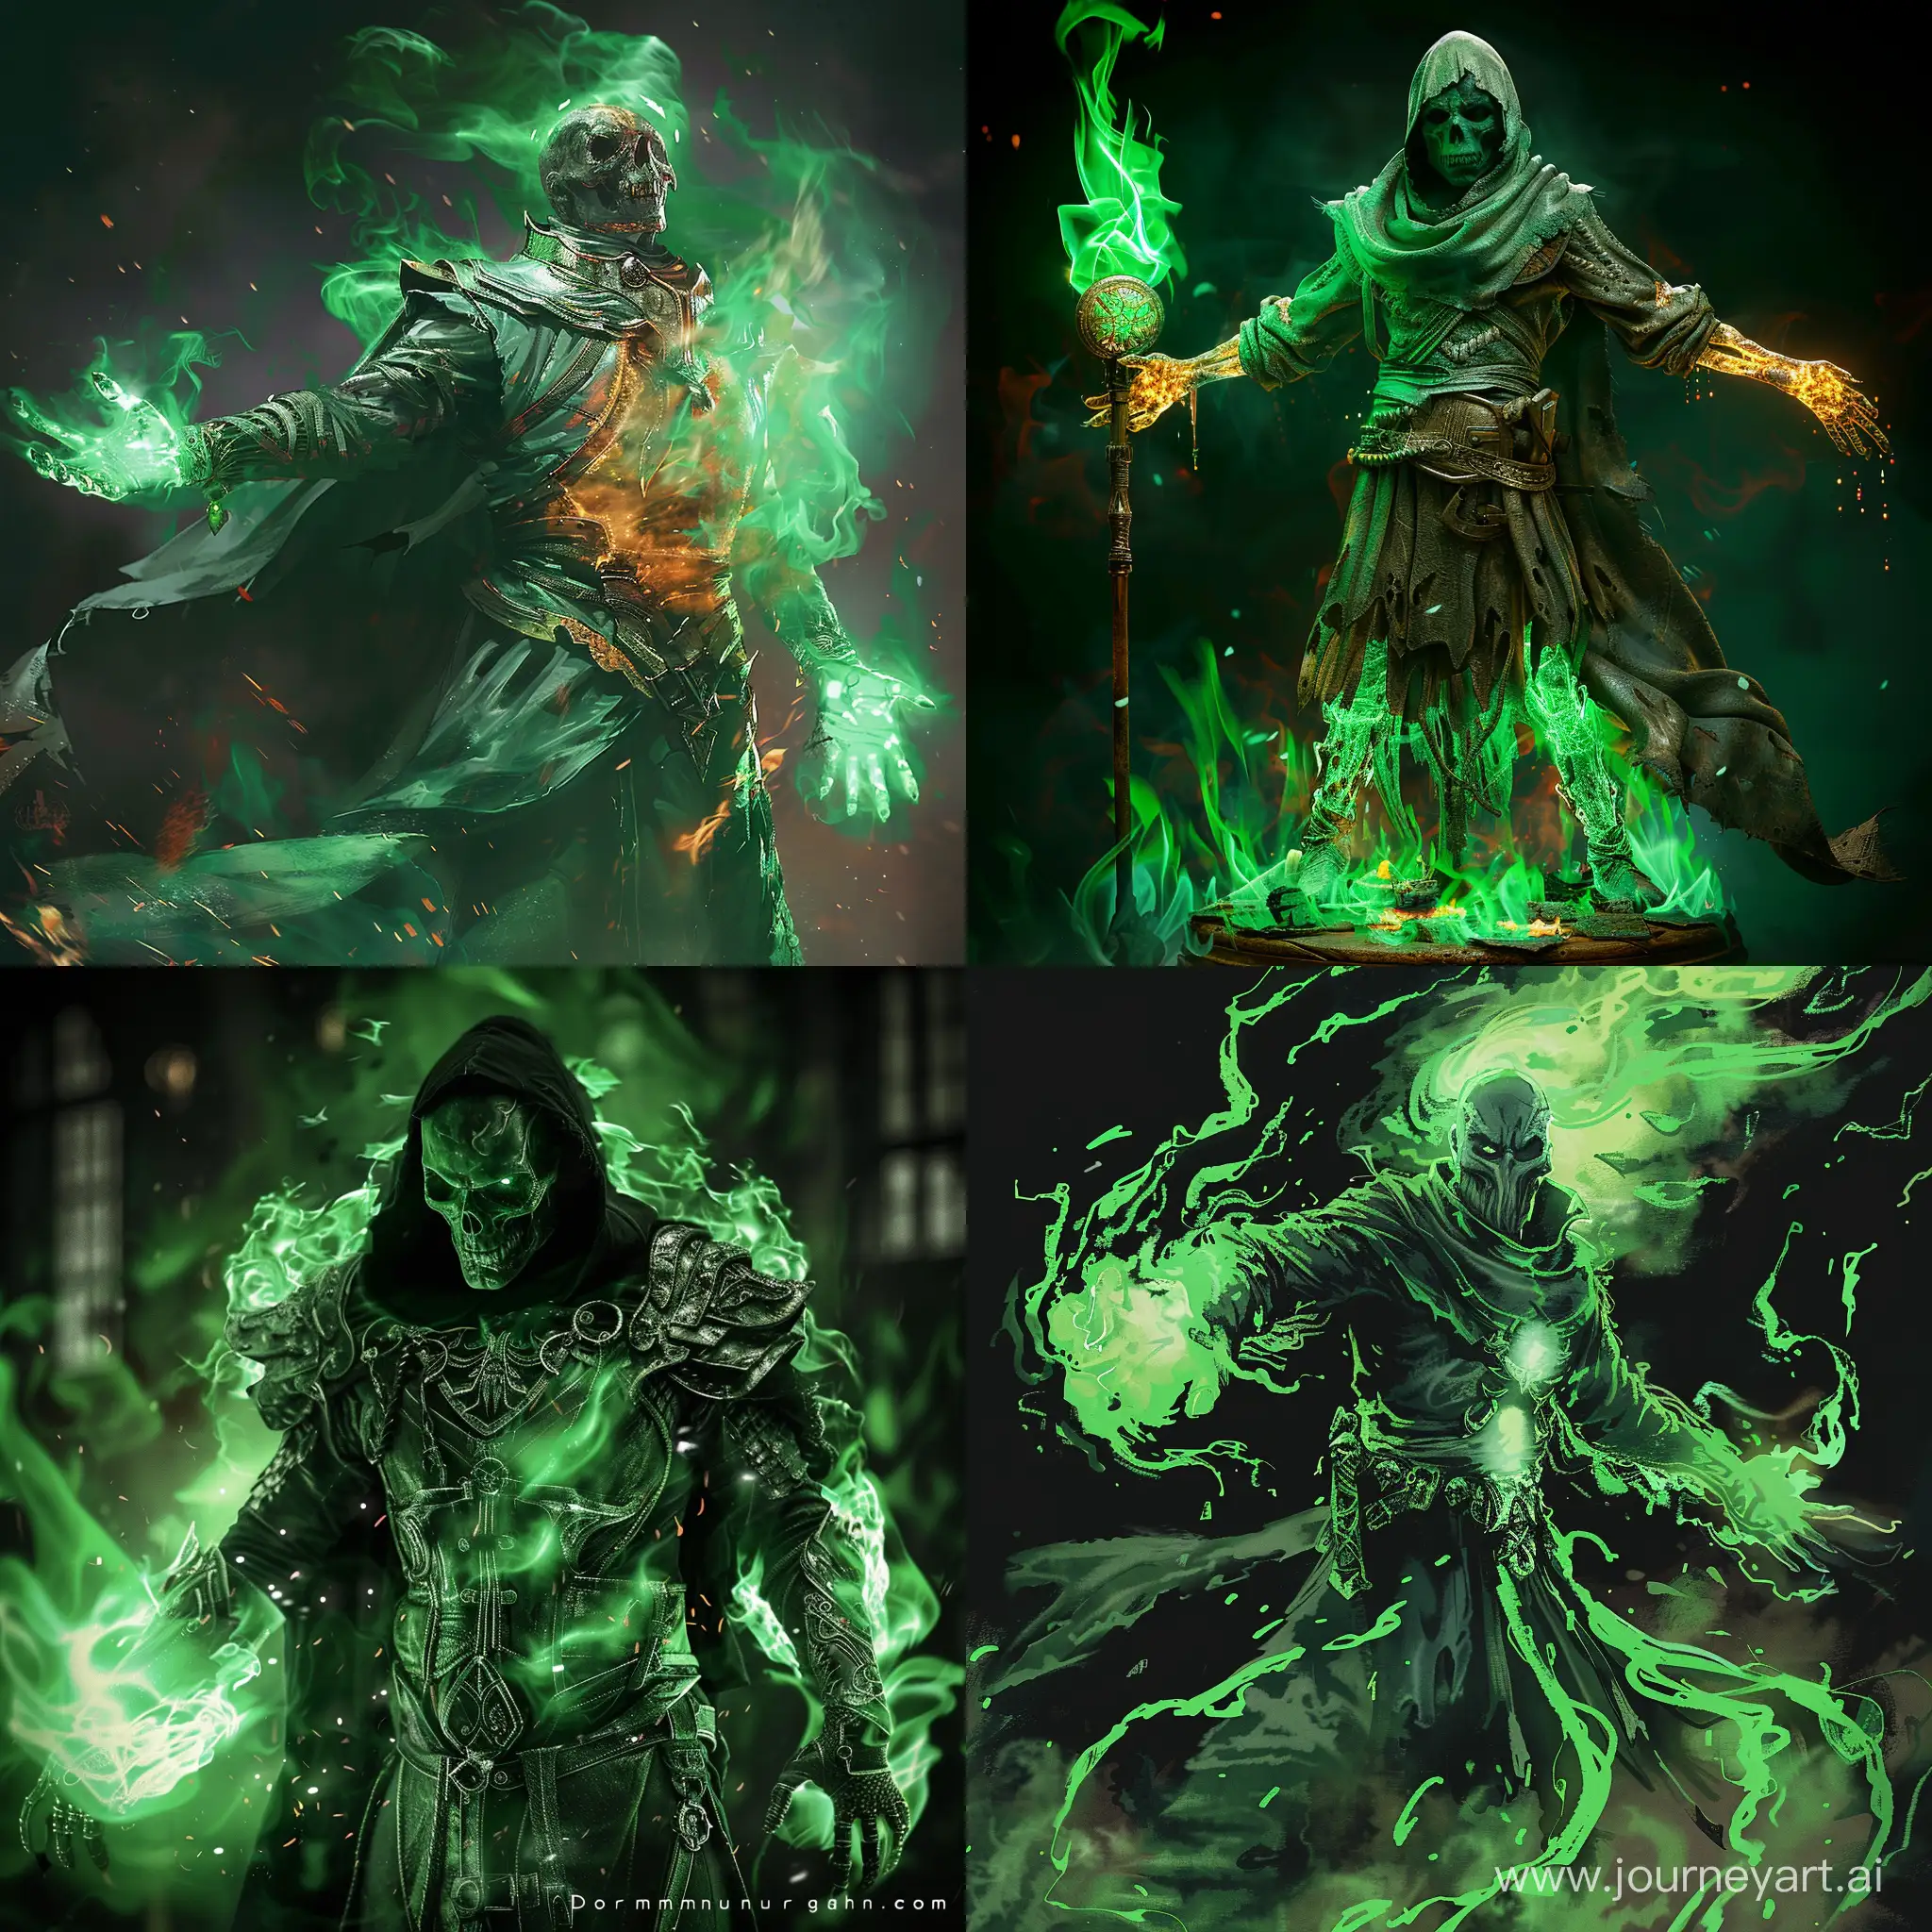 Dormammu-the-Necromancer-Conjuring-Green-Necrotic-Flame